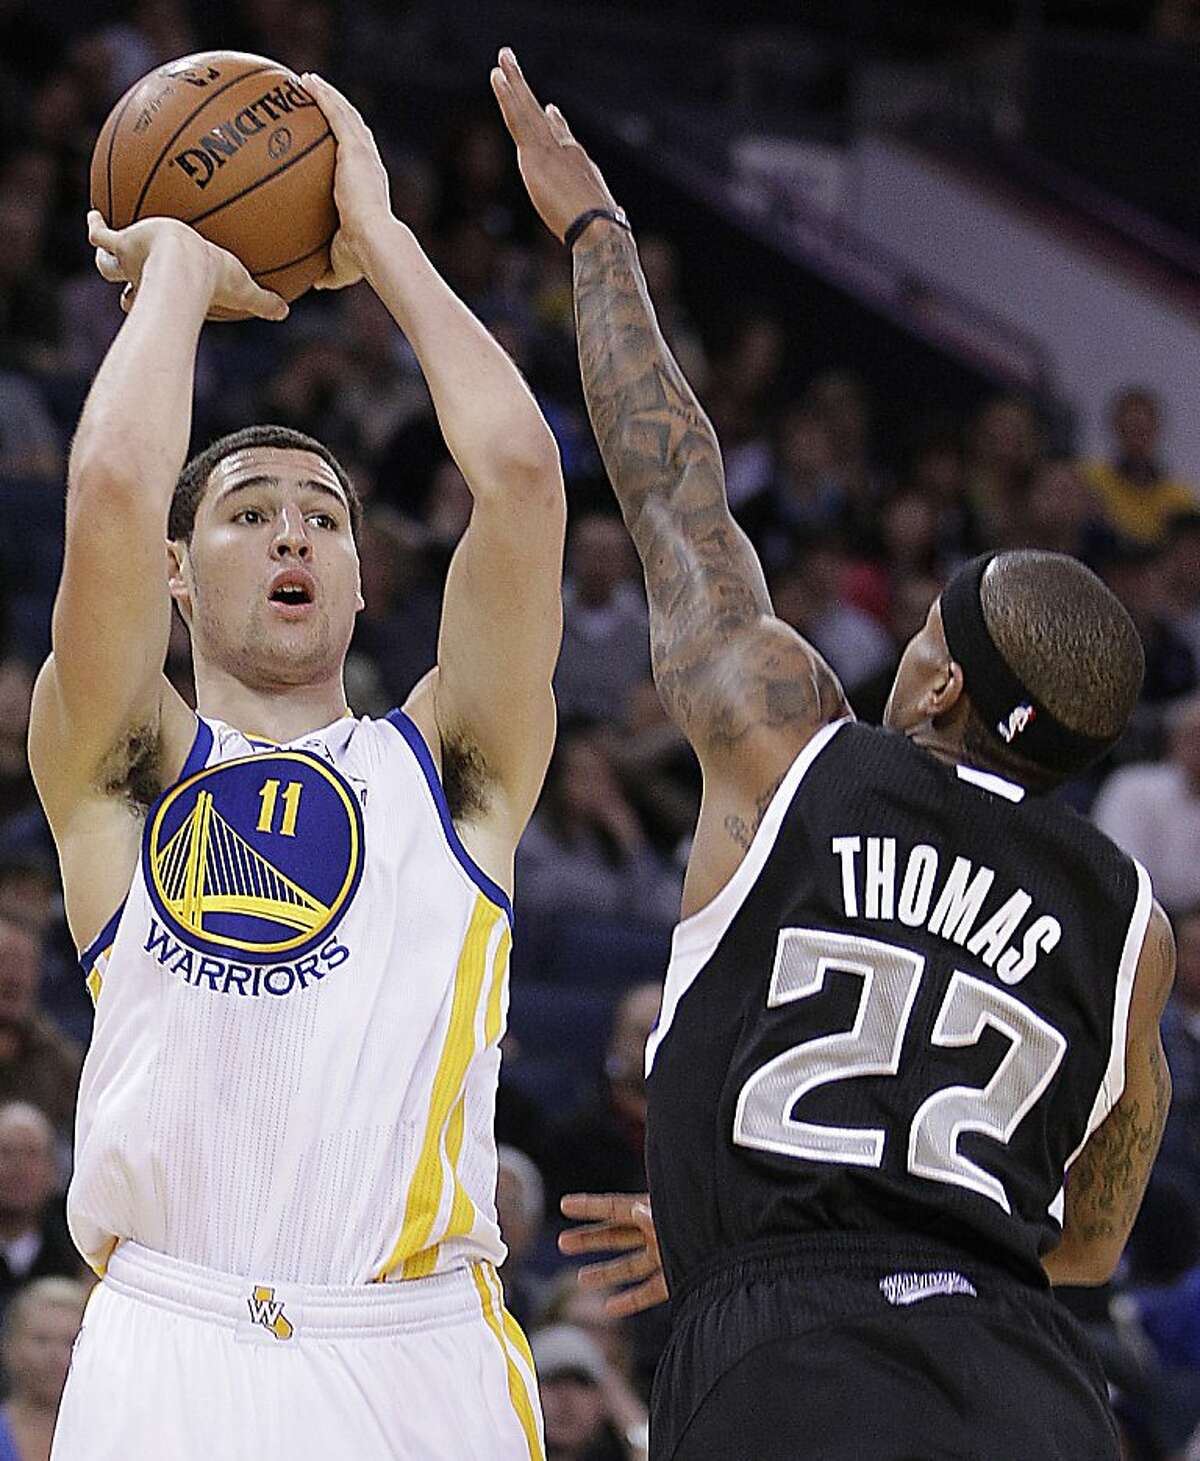 Golden State Warriors' Klay Thompson, left, shoots against Sacramento Kings' Isaiah Thomas (22) during an NBA basketball game Saturday, March 24, 2012, in Oakland, Calif. (AP Photo/Ben Margot)